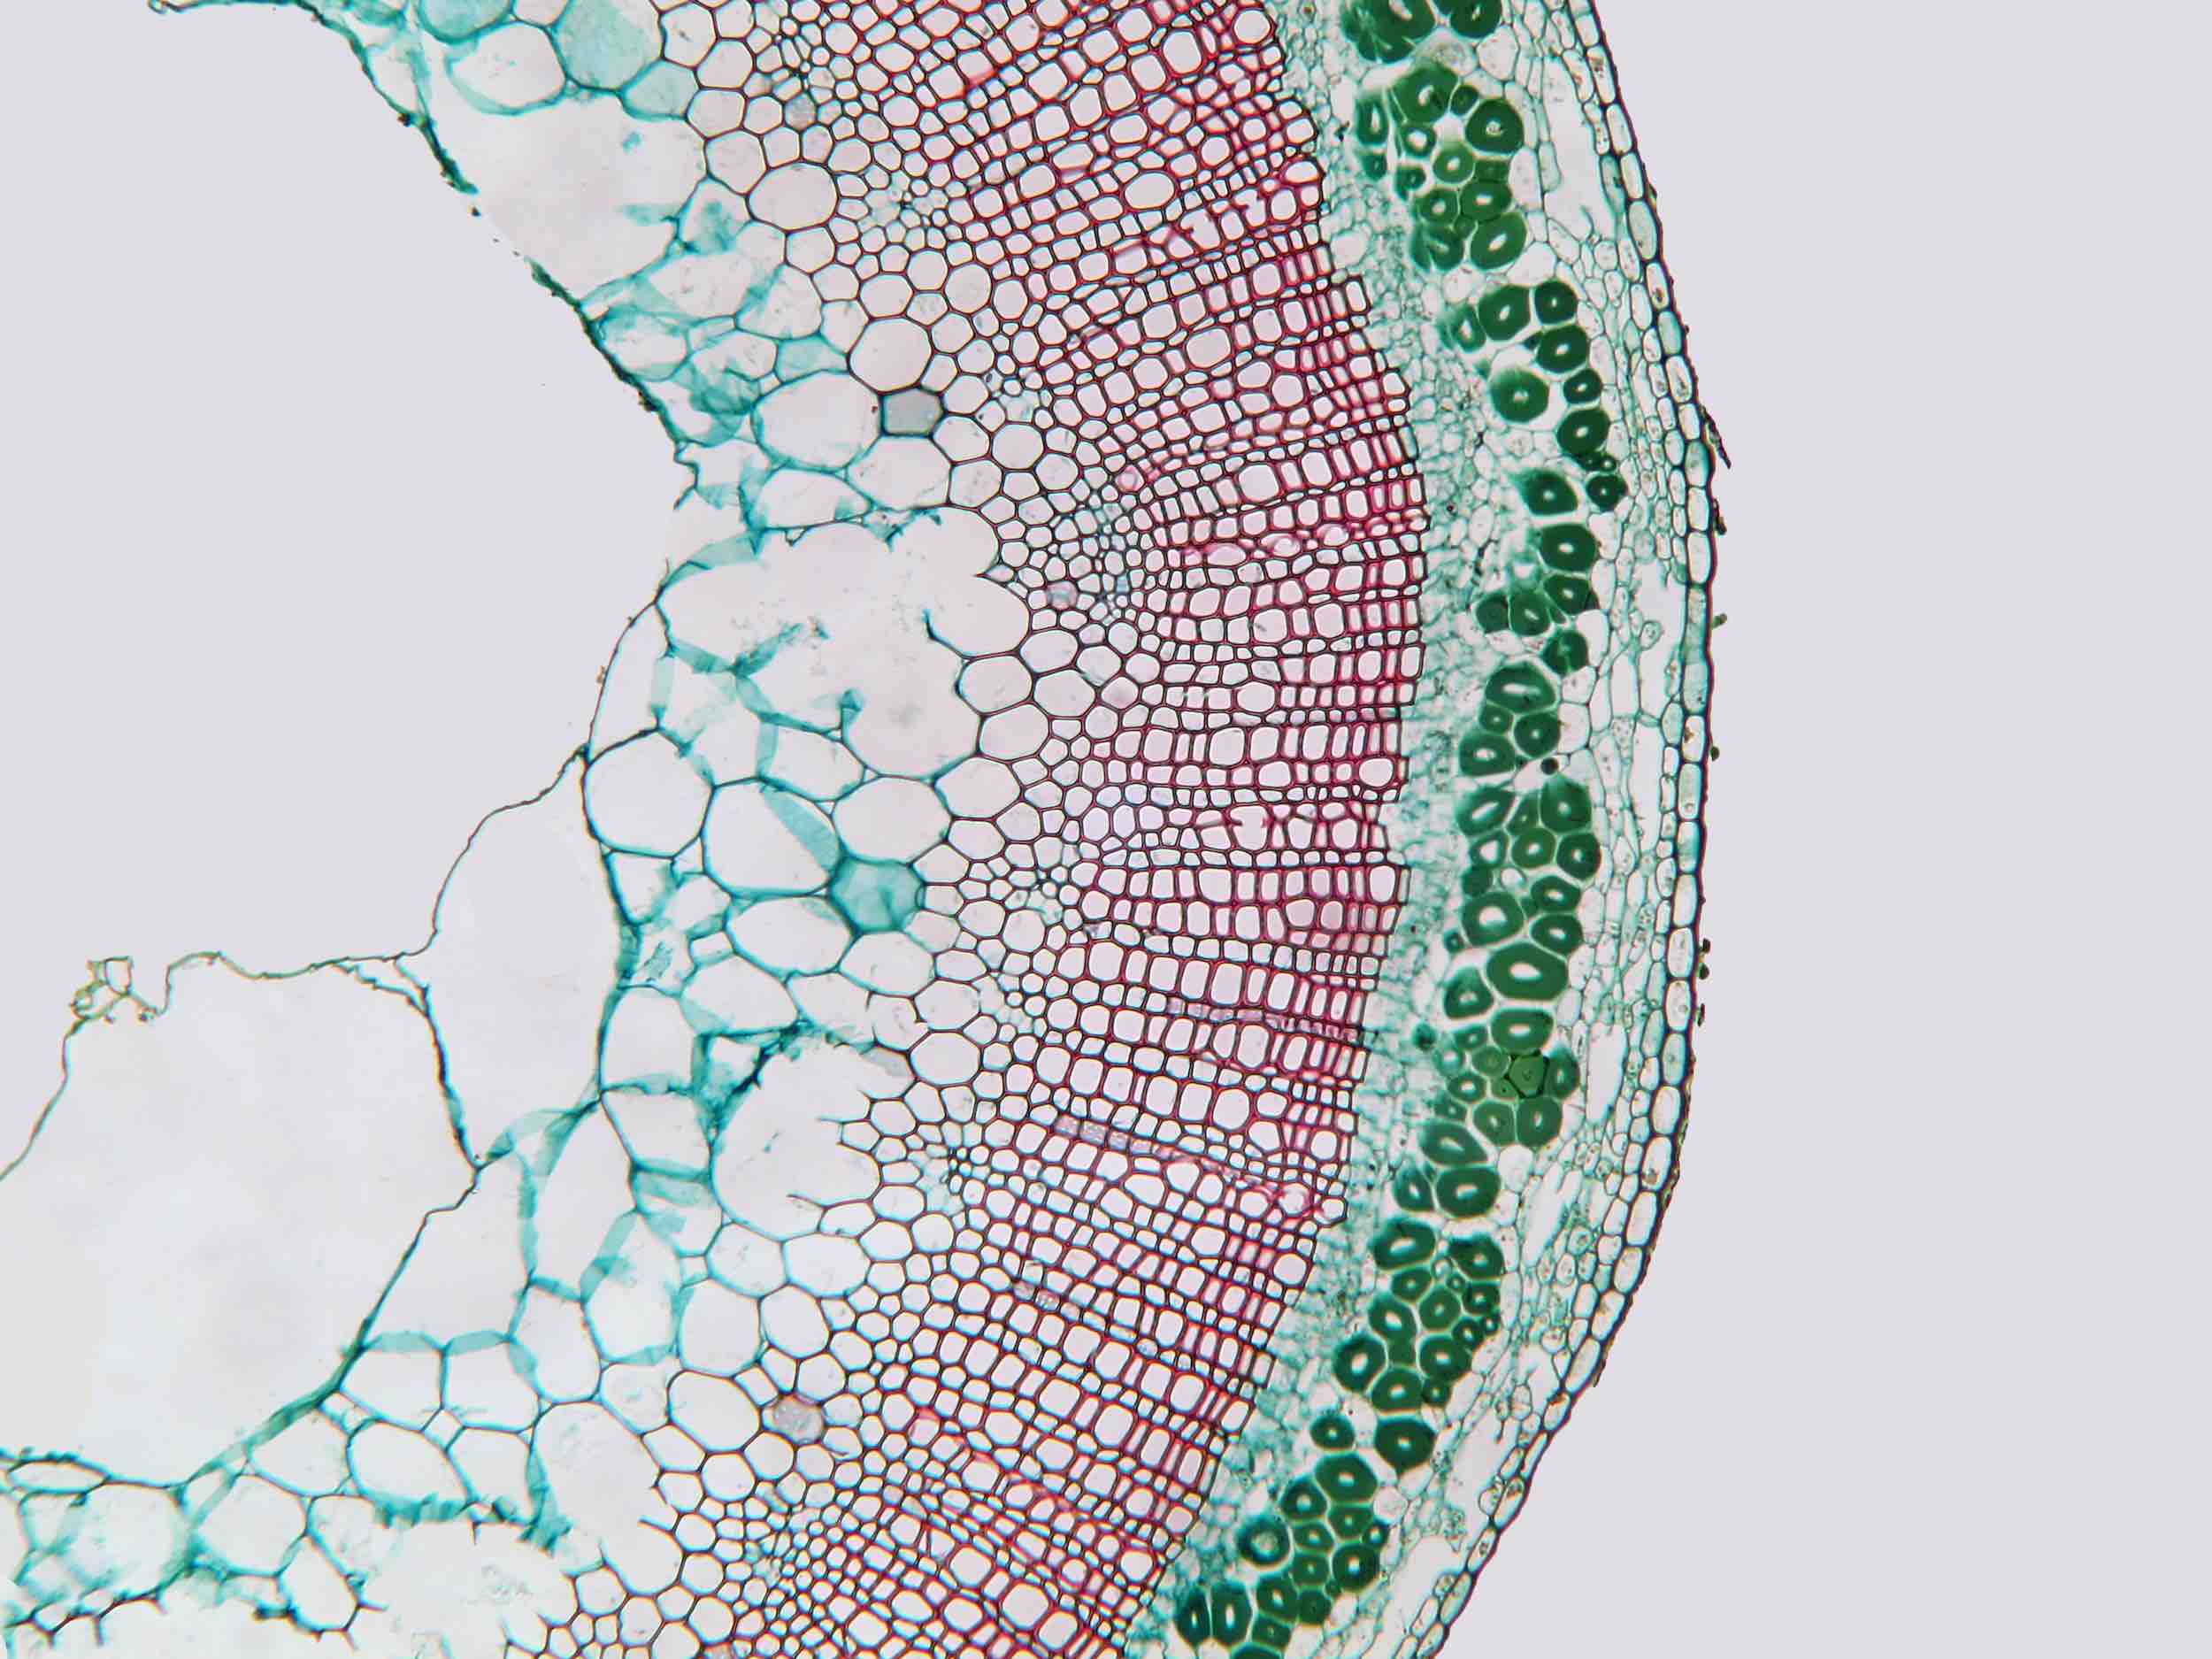 Image of flax microbiome crossection.